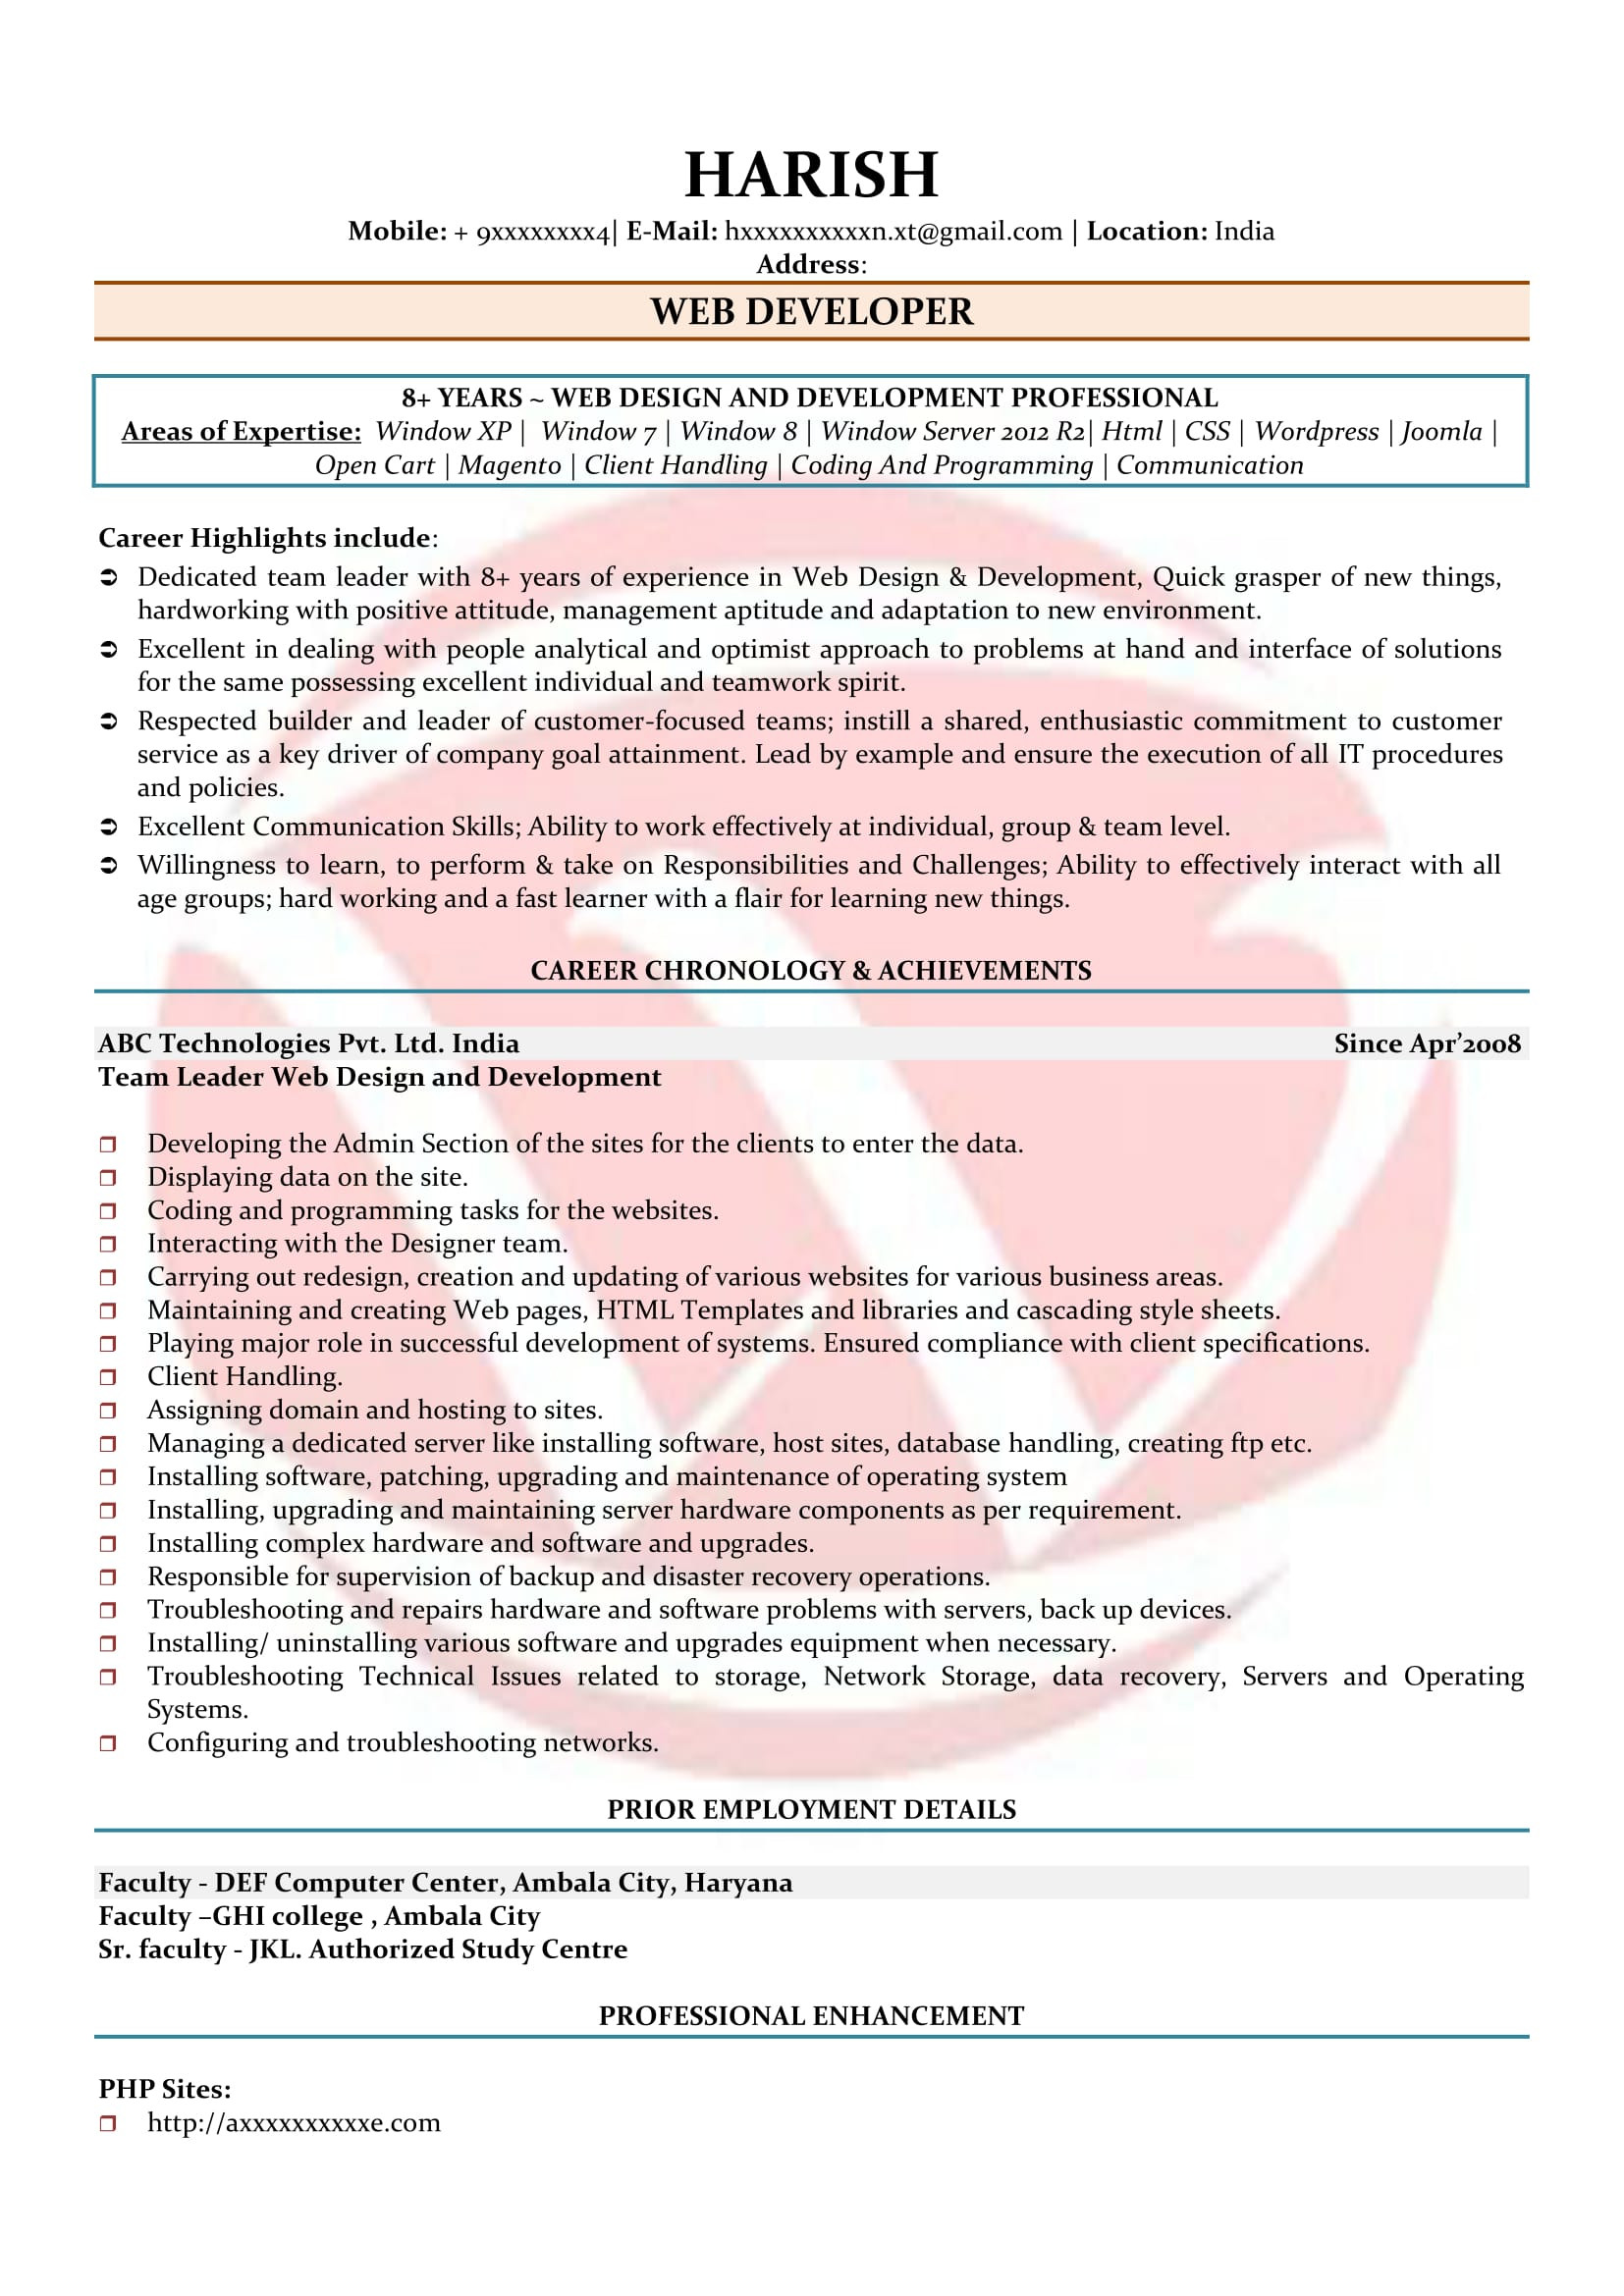 Sample Informatica Fresher Resume formats for 8 Year Experince Web Developer Sample Resumes, Download Resume format Templates!